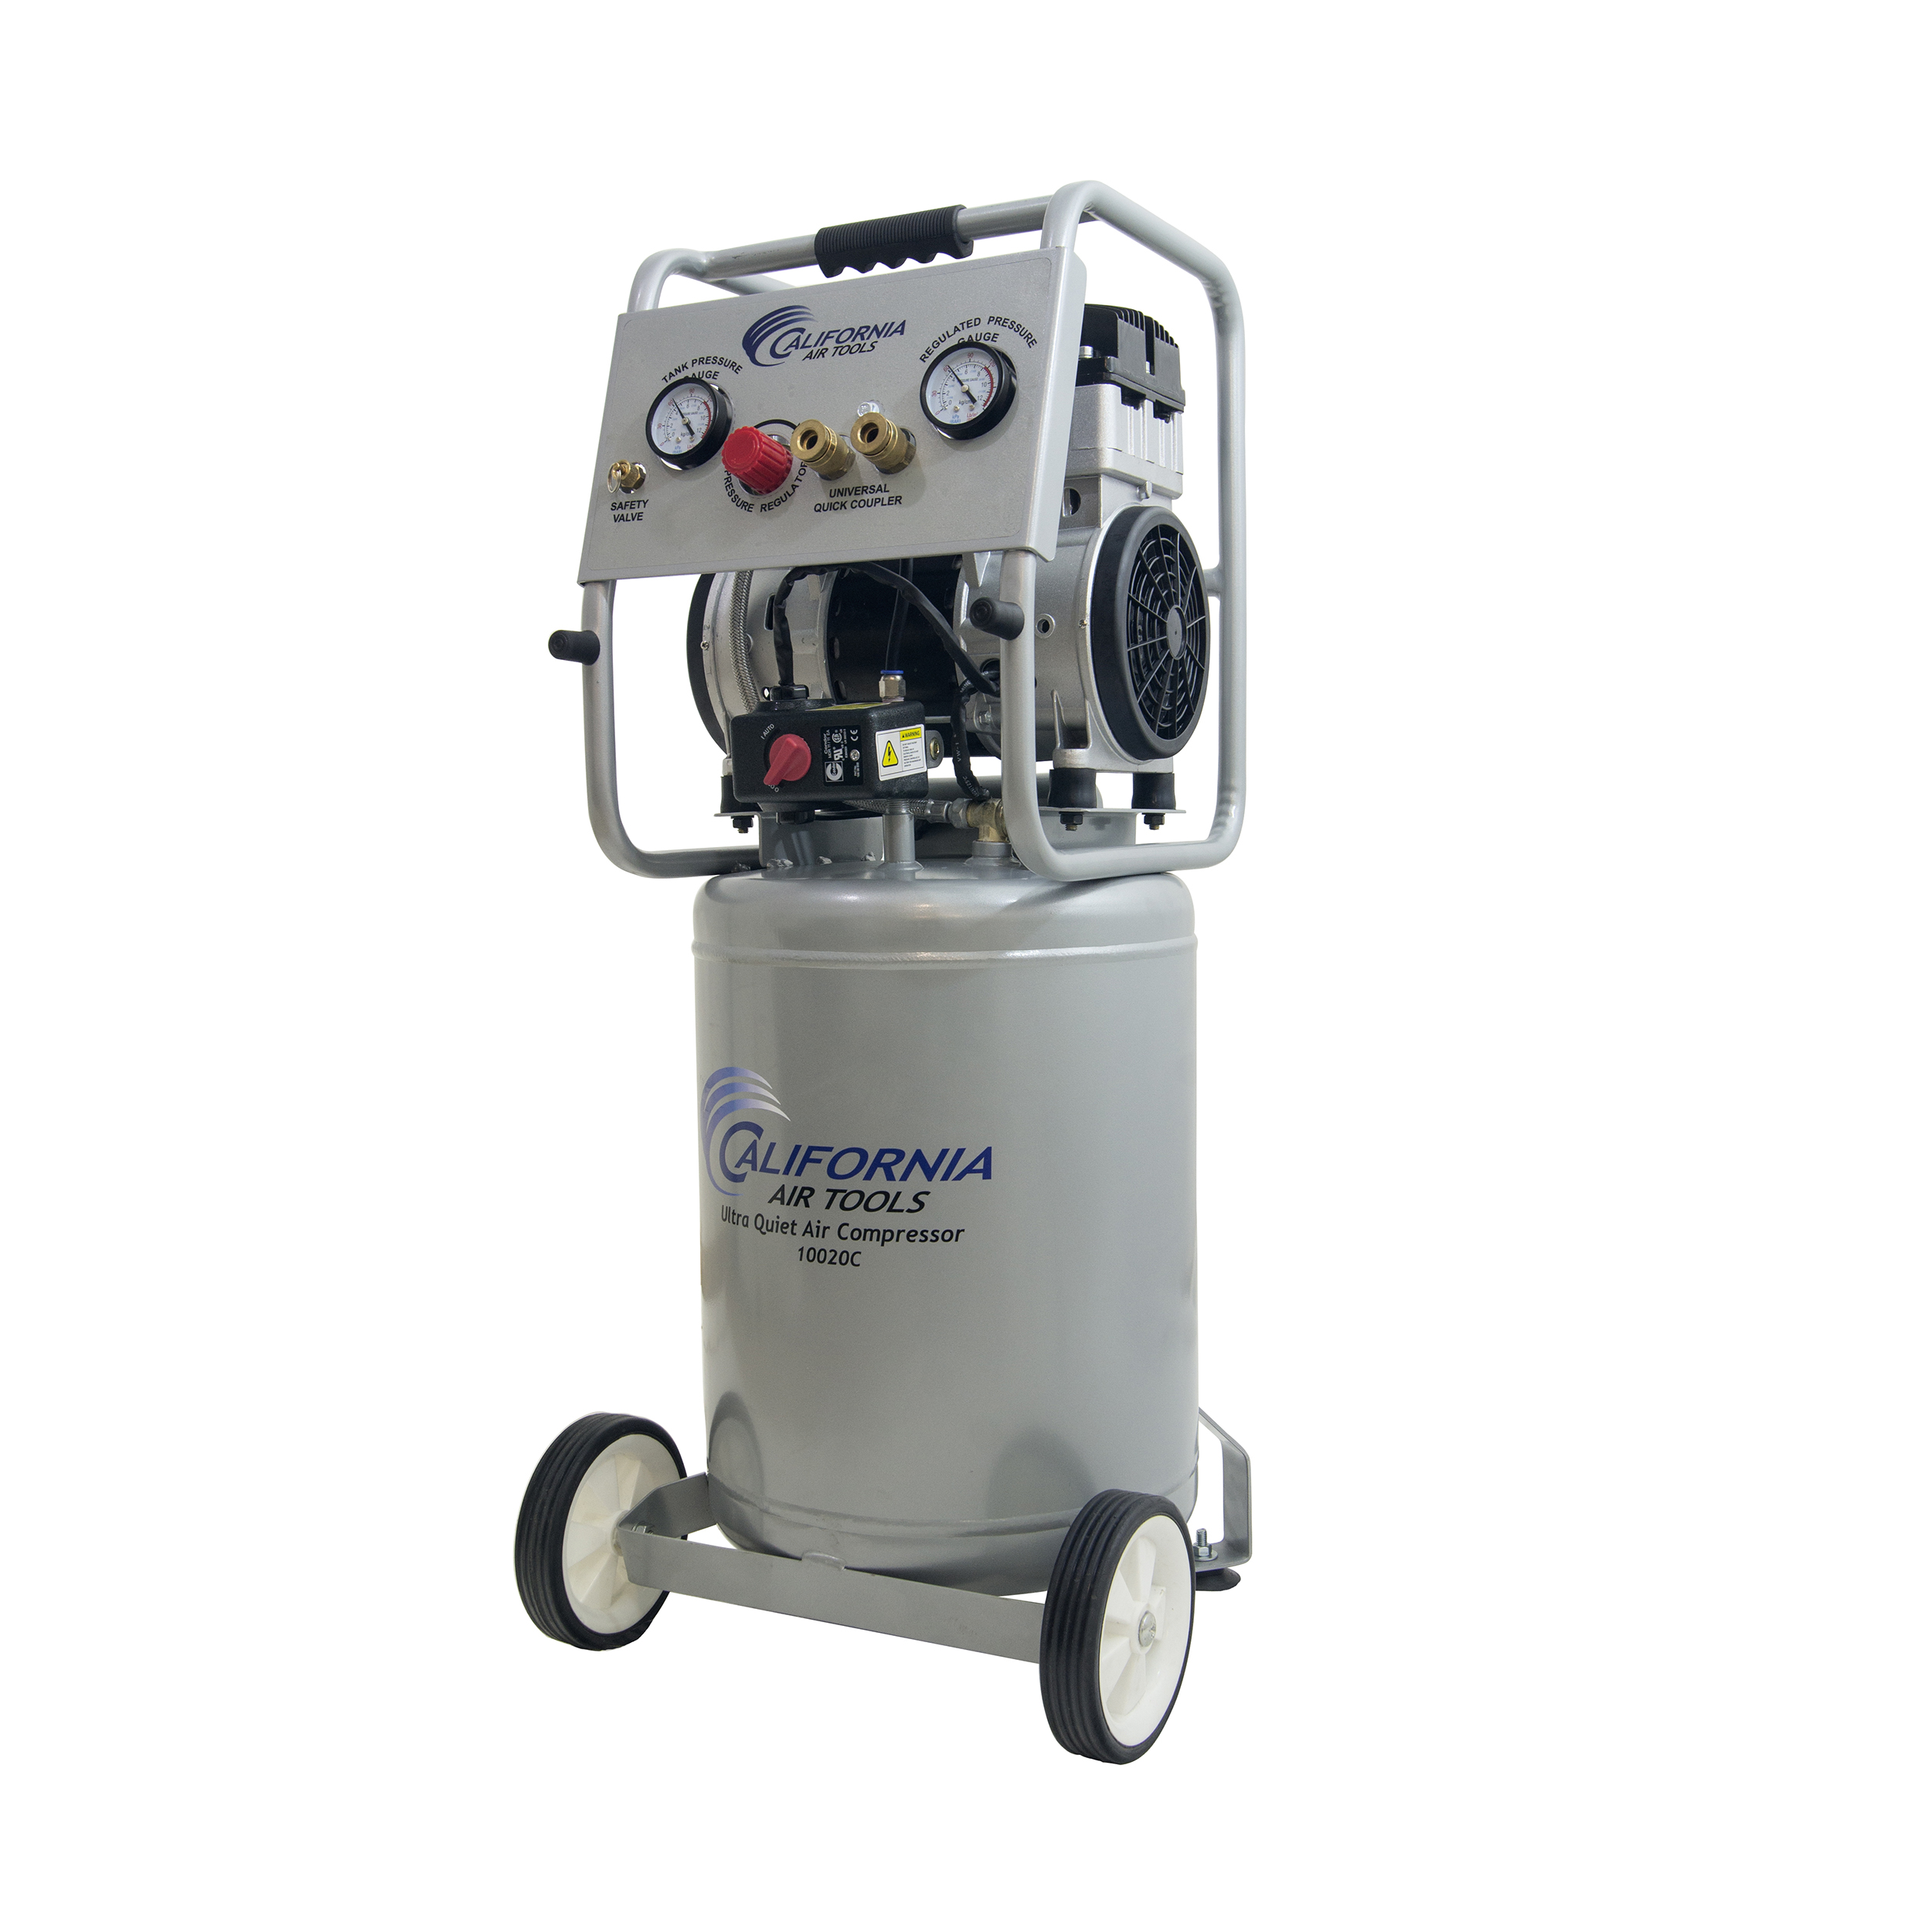 10020cad-22060 Ultra Quiet Oil-free Air Compressor, 2 Hp, 10 Gal., 220v With Auto Drain Valve